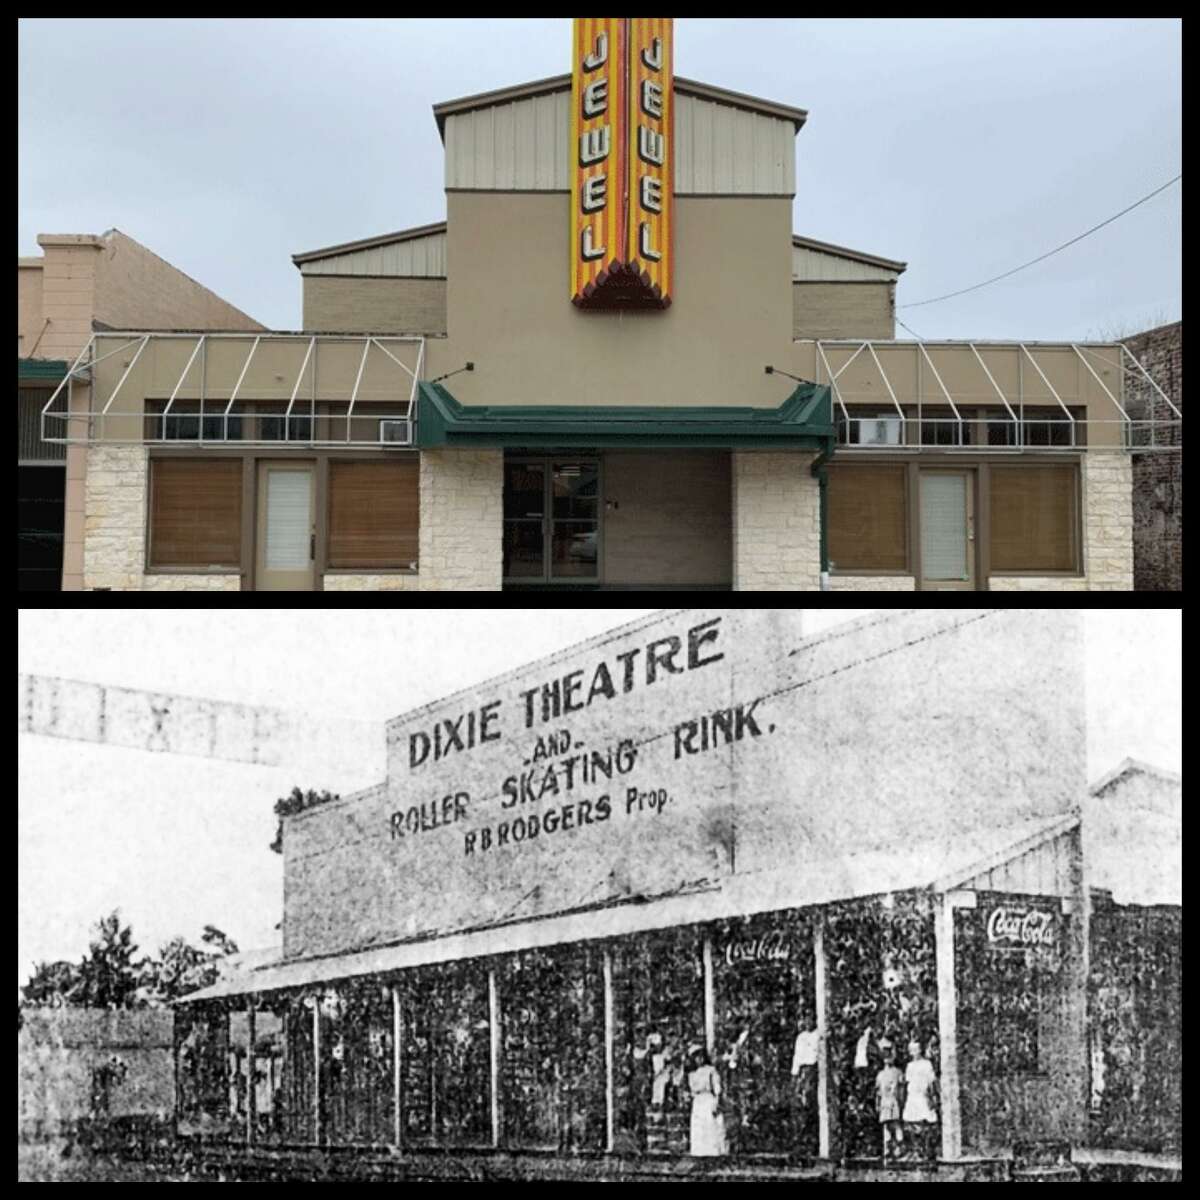 The Jewel Theatre, located on Main Street in Humble, was originally known as the Dixie Theatre and Roller Skating Rink, owned by R.B. Rogers in the early 1900's. In 1947 the Jewel Theatre sign moved from Texas City to Humble after the 1947 Texas City Disaster.